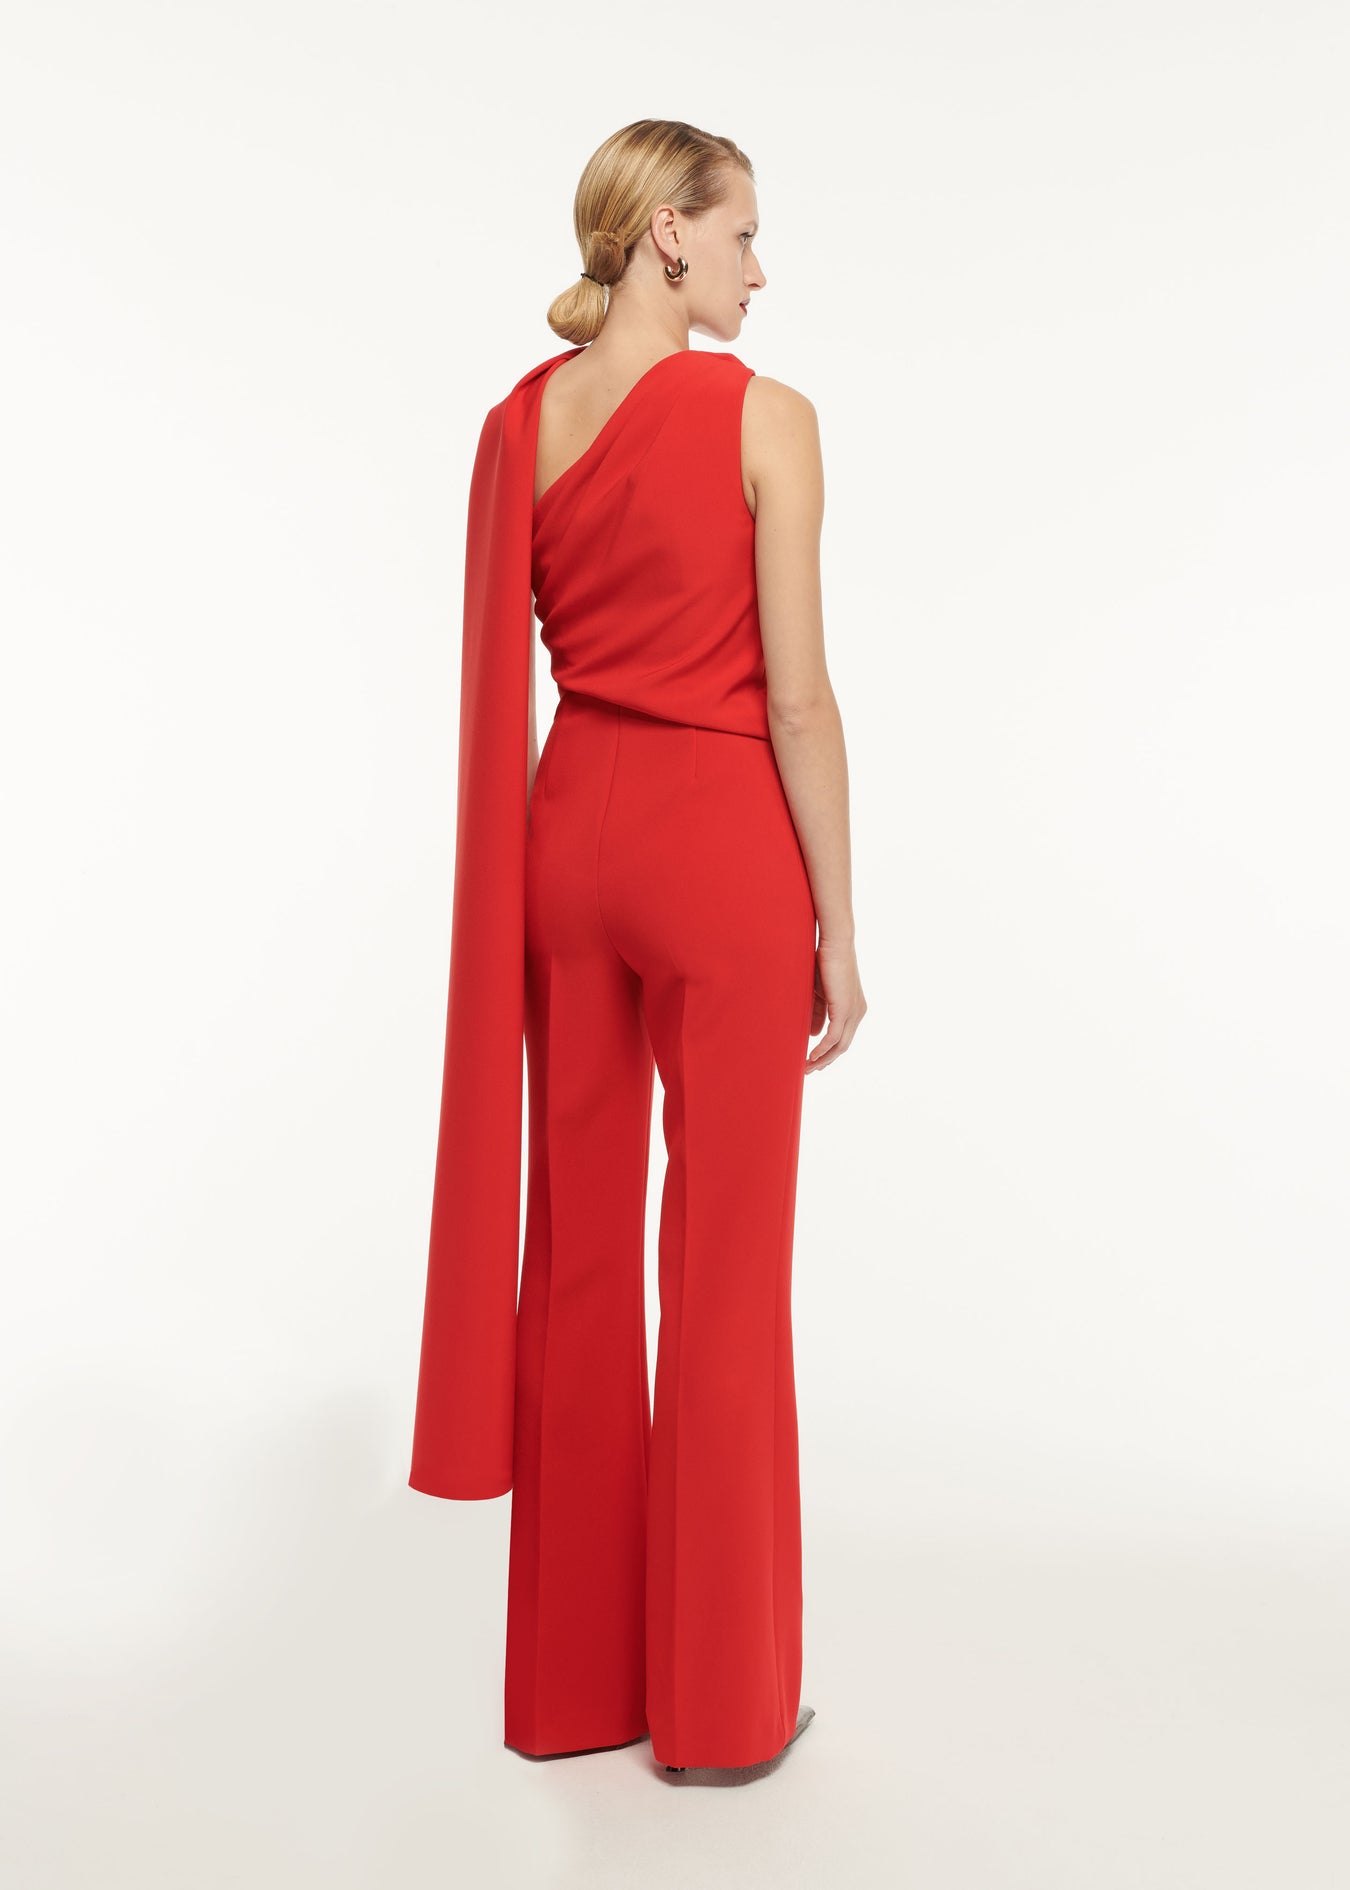 The back of a woman wearing the Asymmetric Bow Stretch Cady Jumpsuit